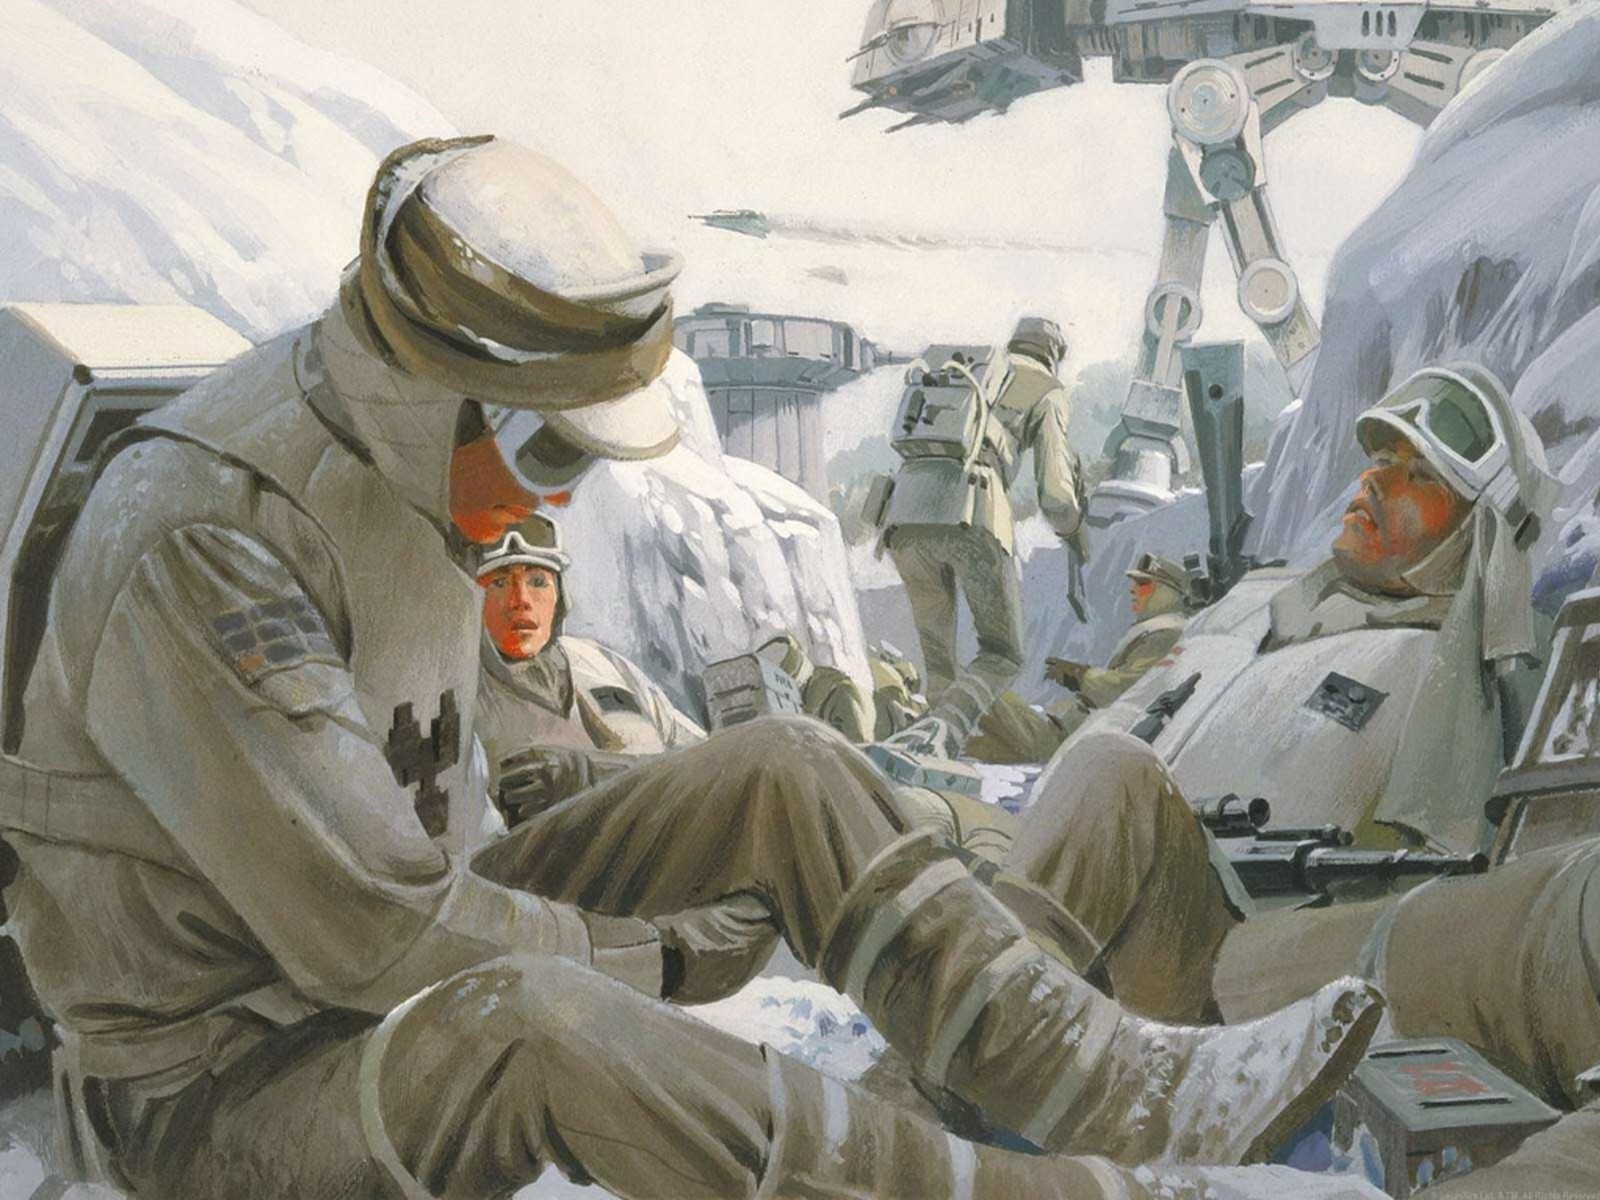 Star Wars Soldier AT AT Hoth Artwork Painting Battle Star Wars Episode V The Empire Strikes Back 1600x1200